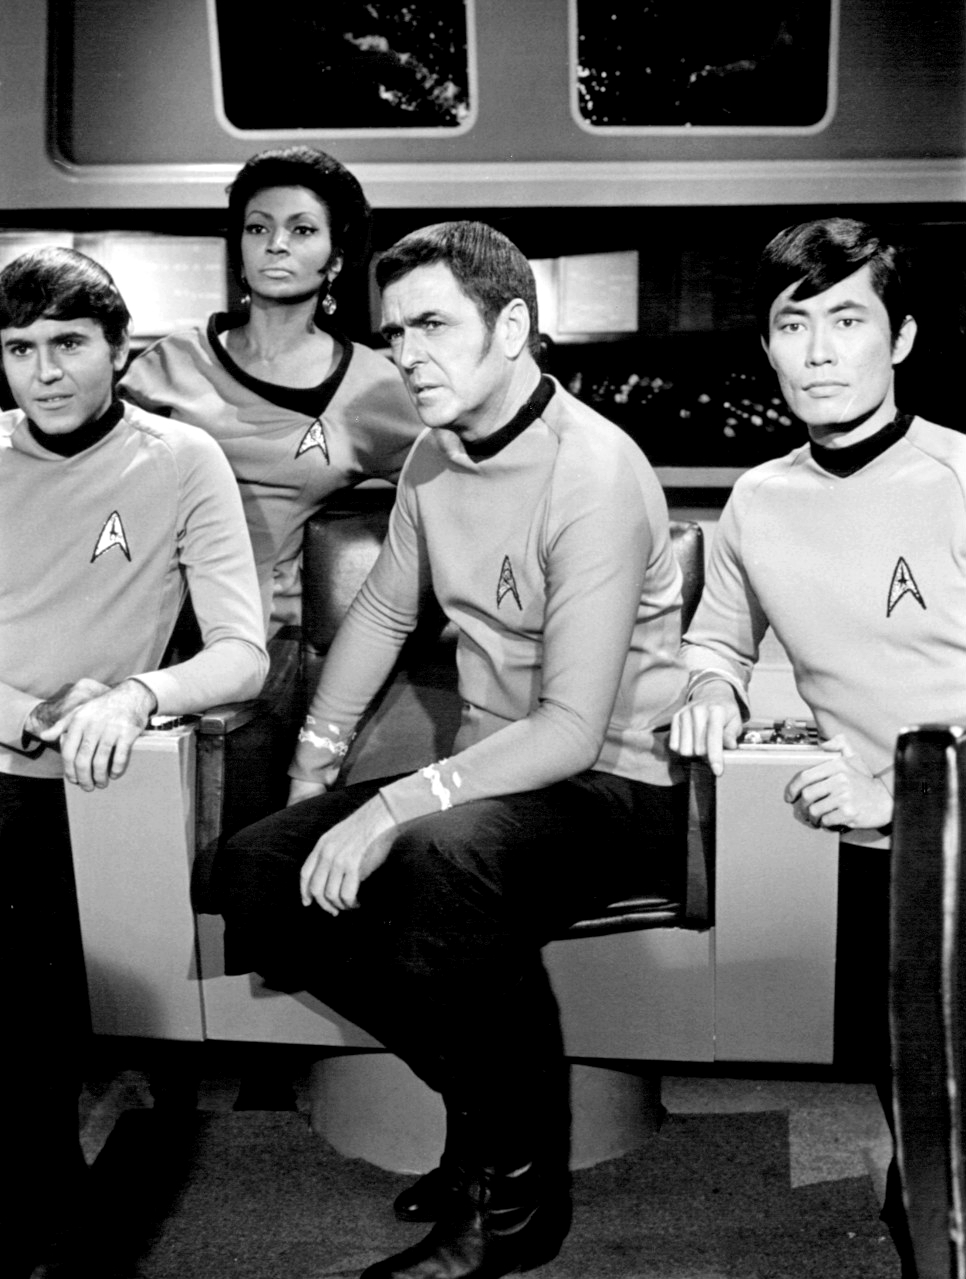 Black-and-white image of some of the Star Trek cast